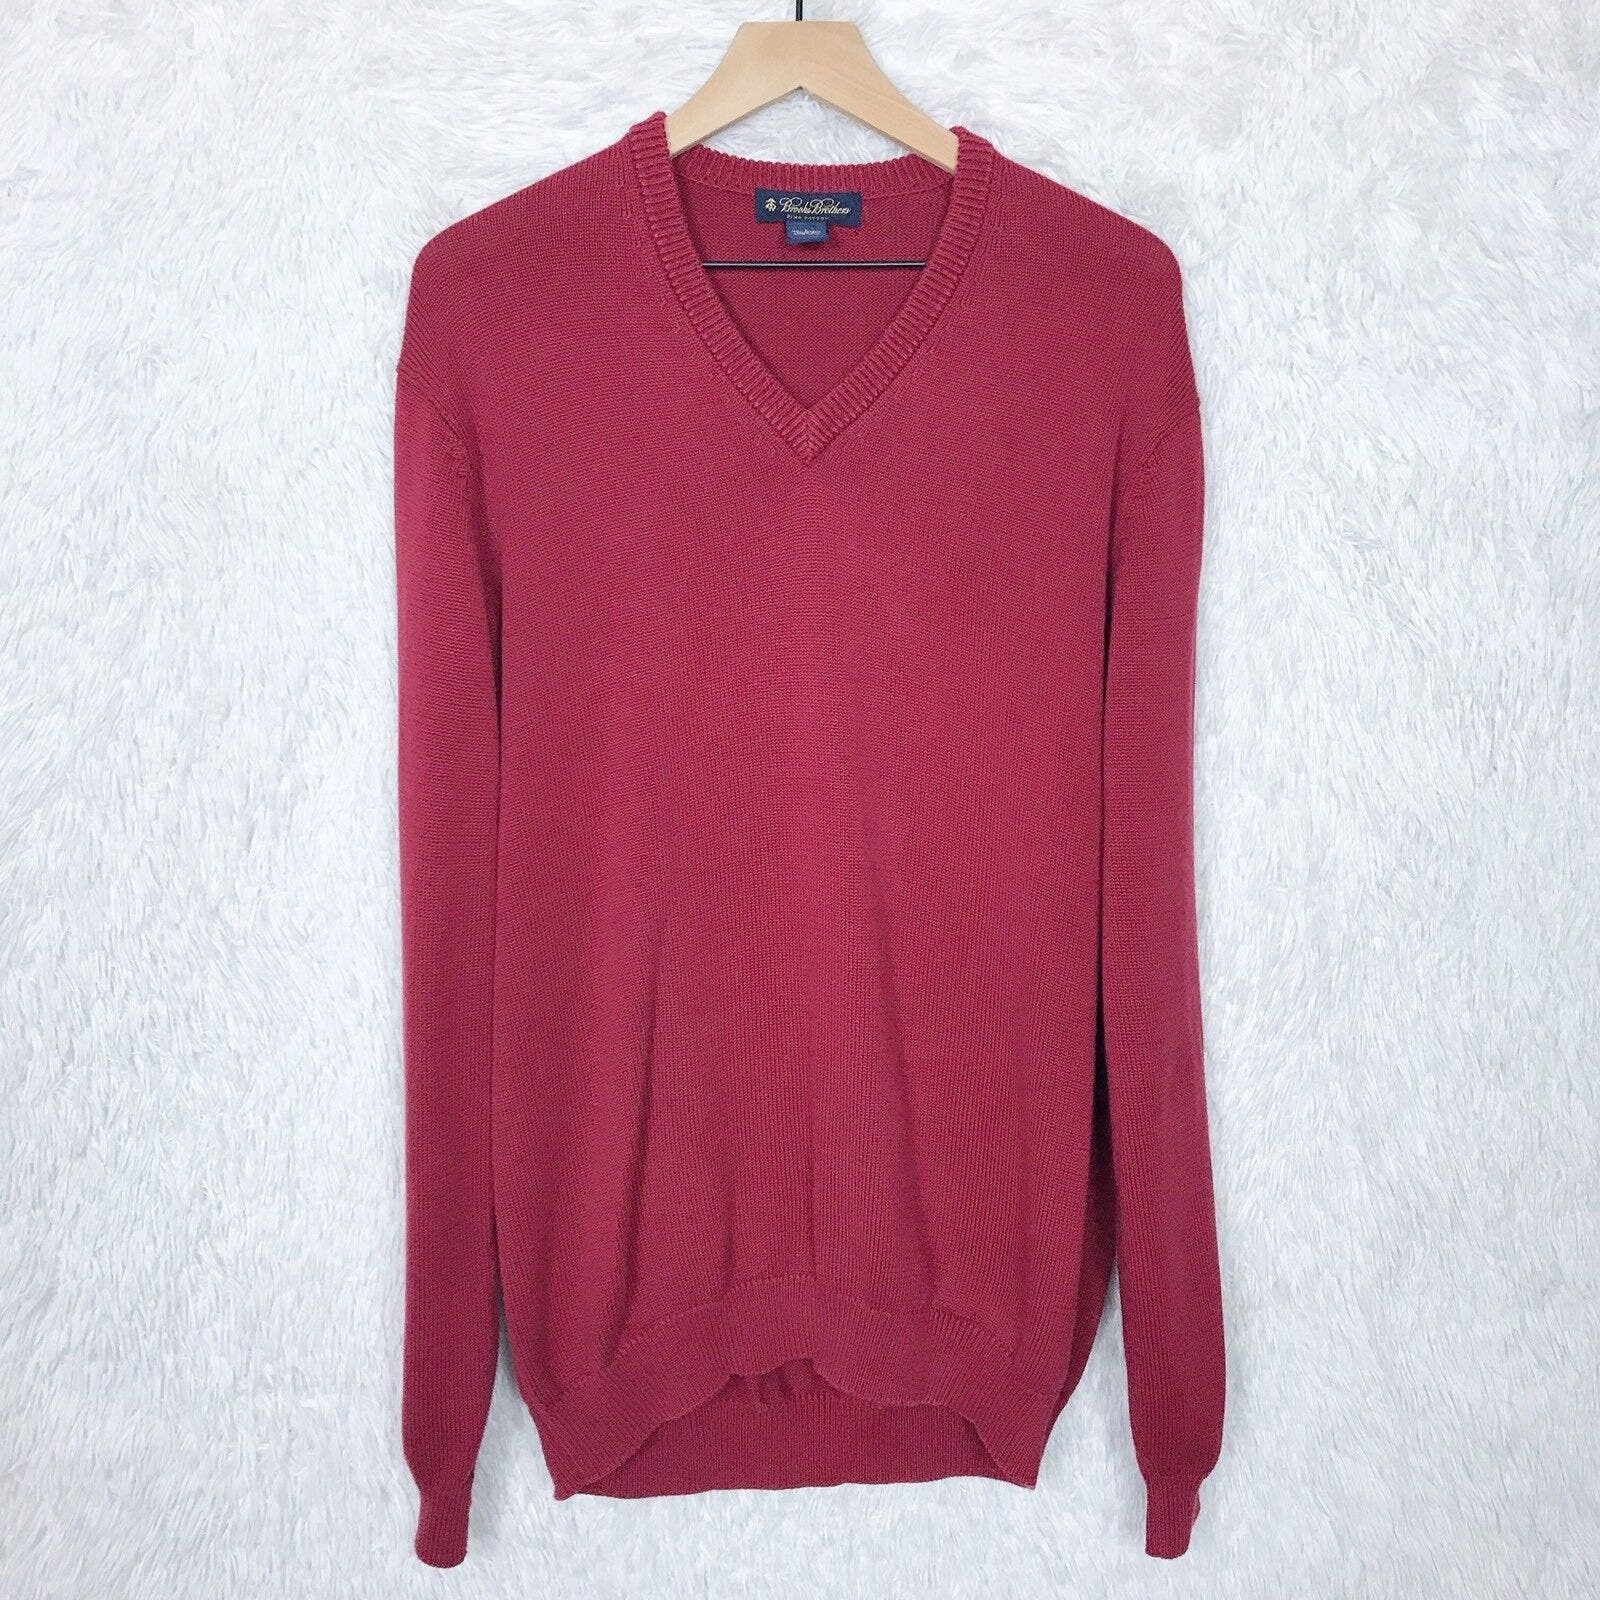 Primary image for Brooks Brothers Pima Cotton Sweater Red V Neck Pullover Ribbed VTG Mens Large